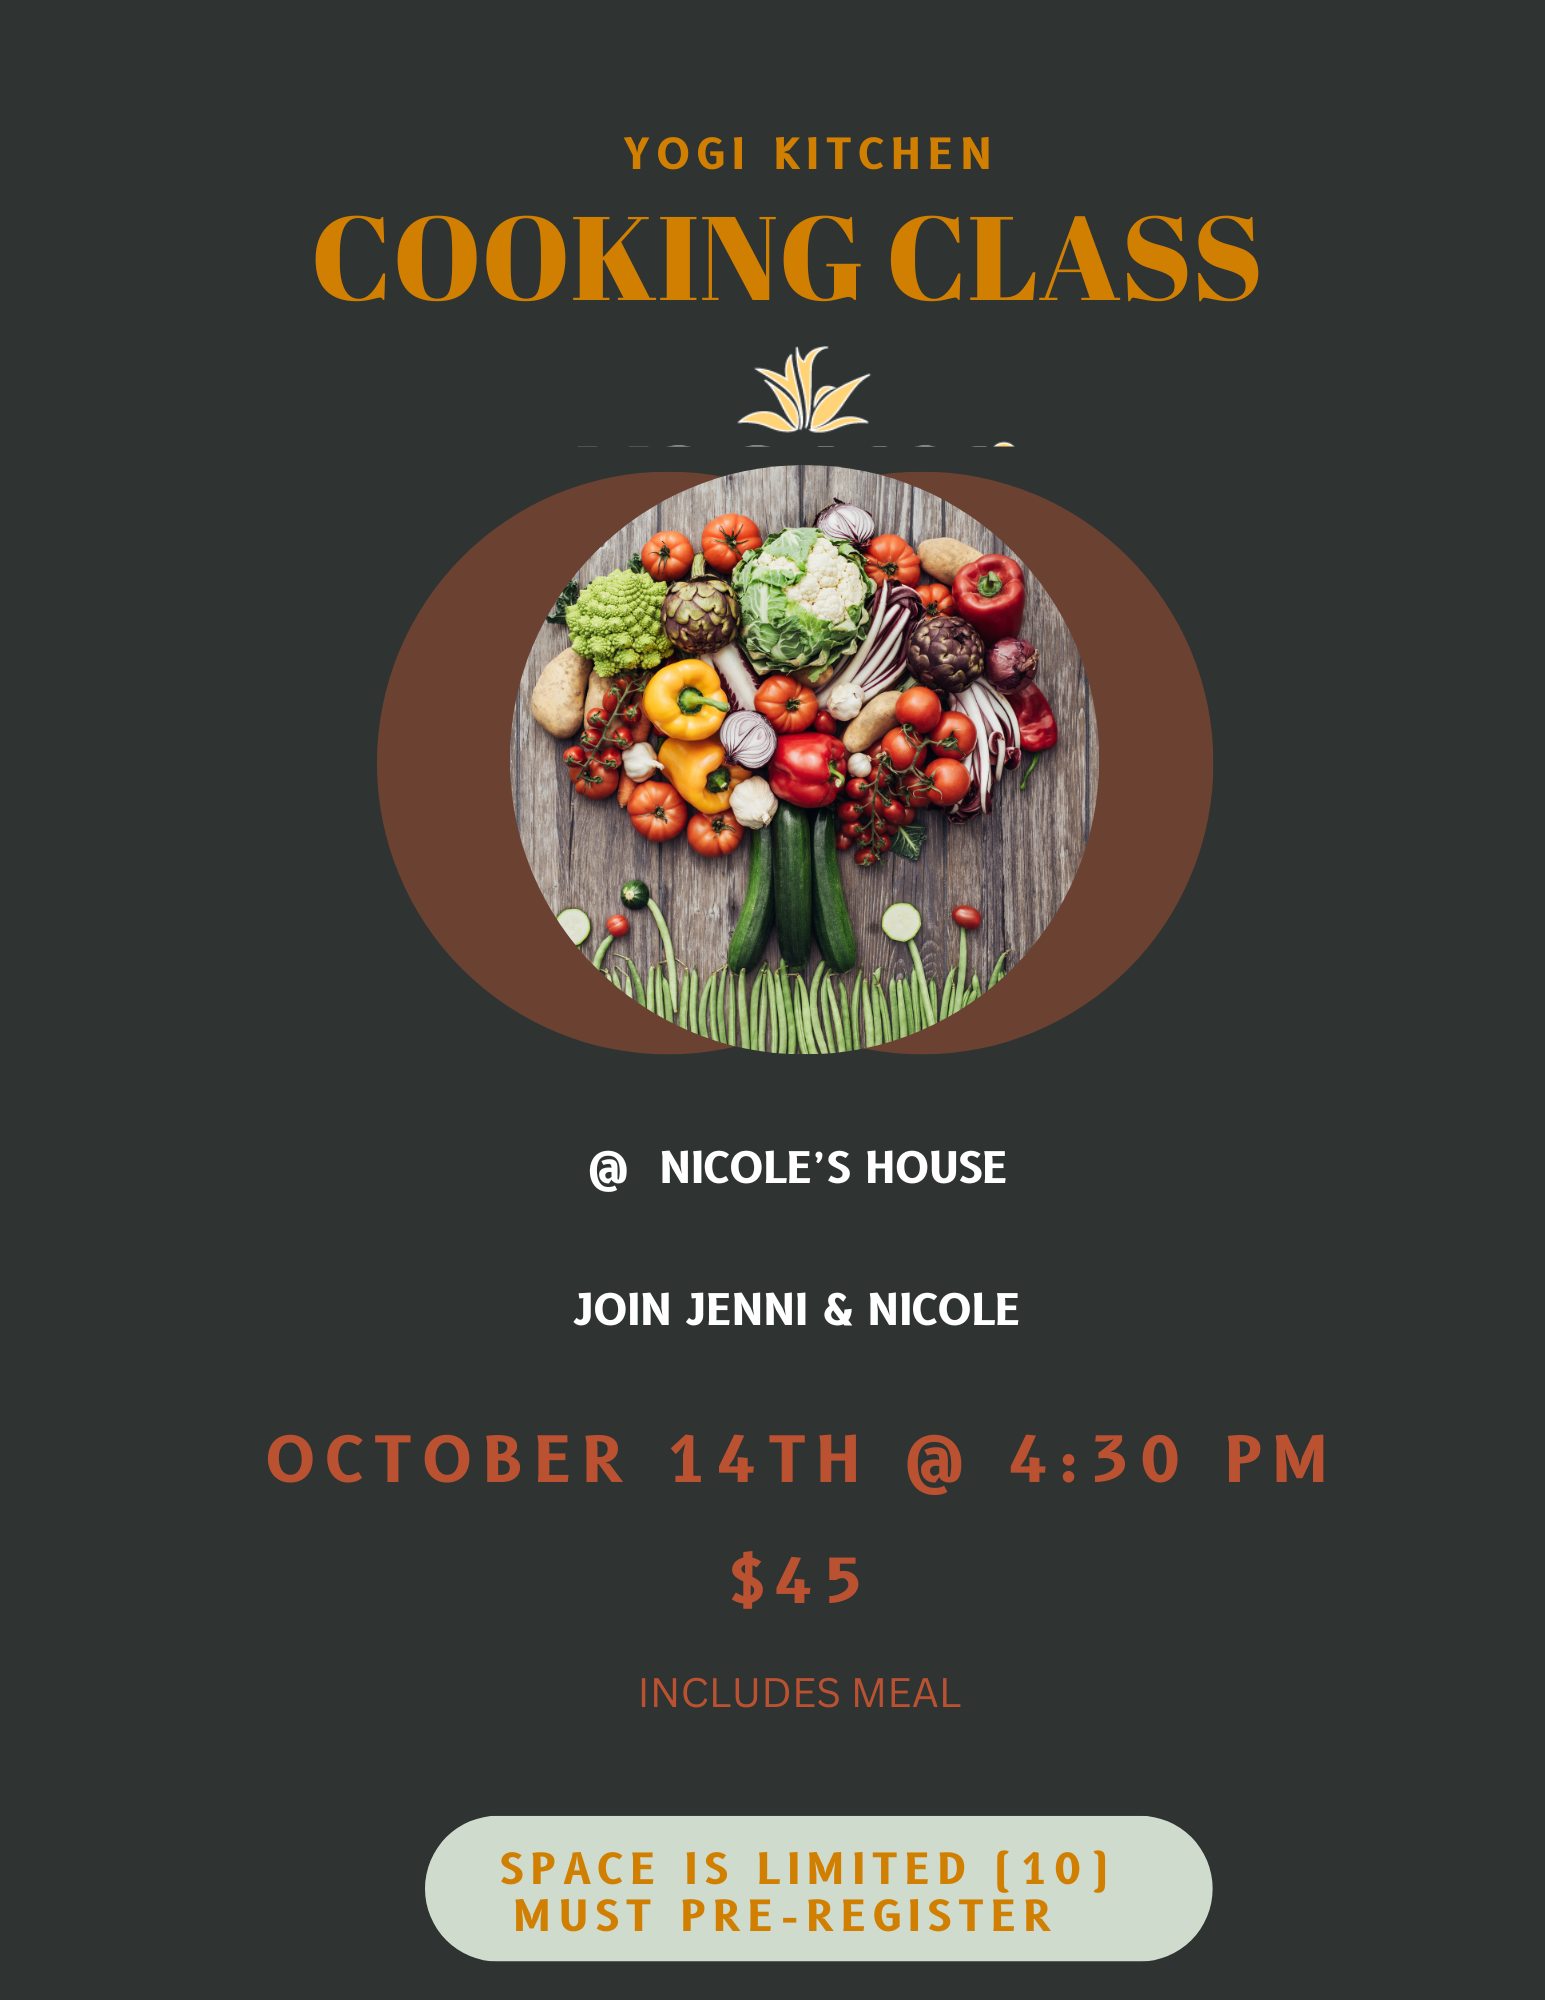 Yoga cooking class @ nicole's (8.5 × 11 in) (8.5 × 11 in)-2